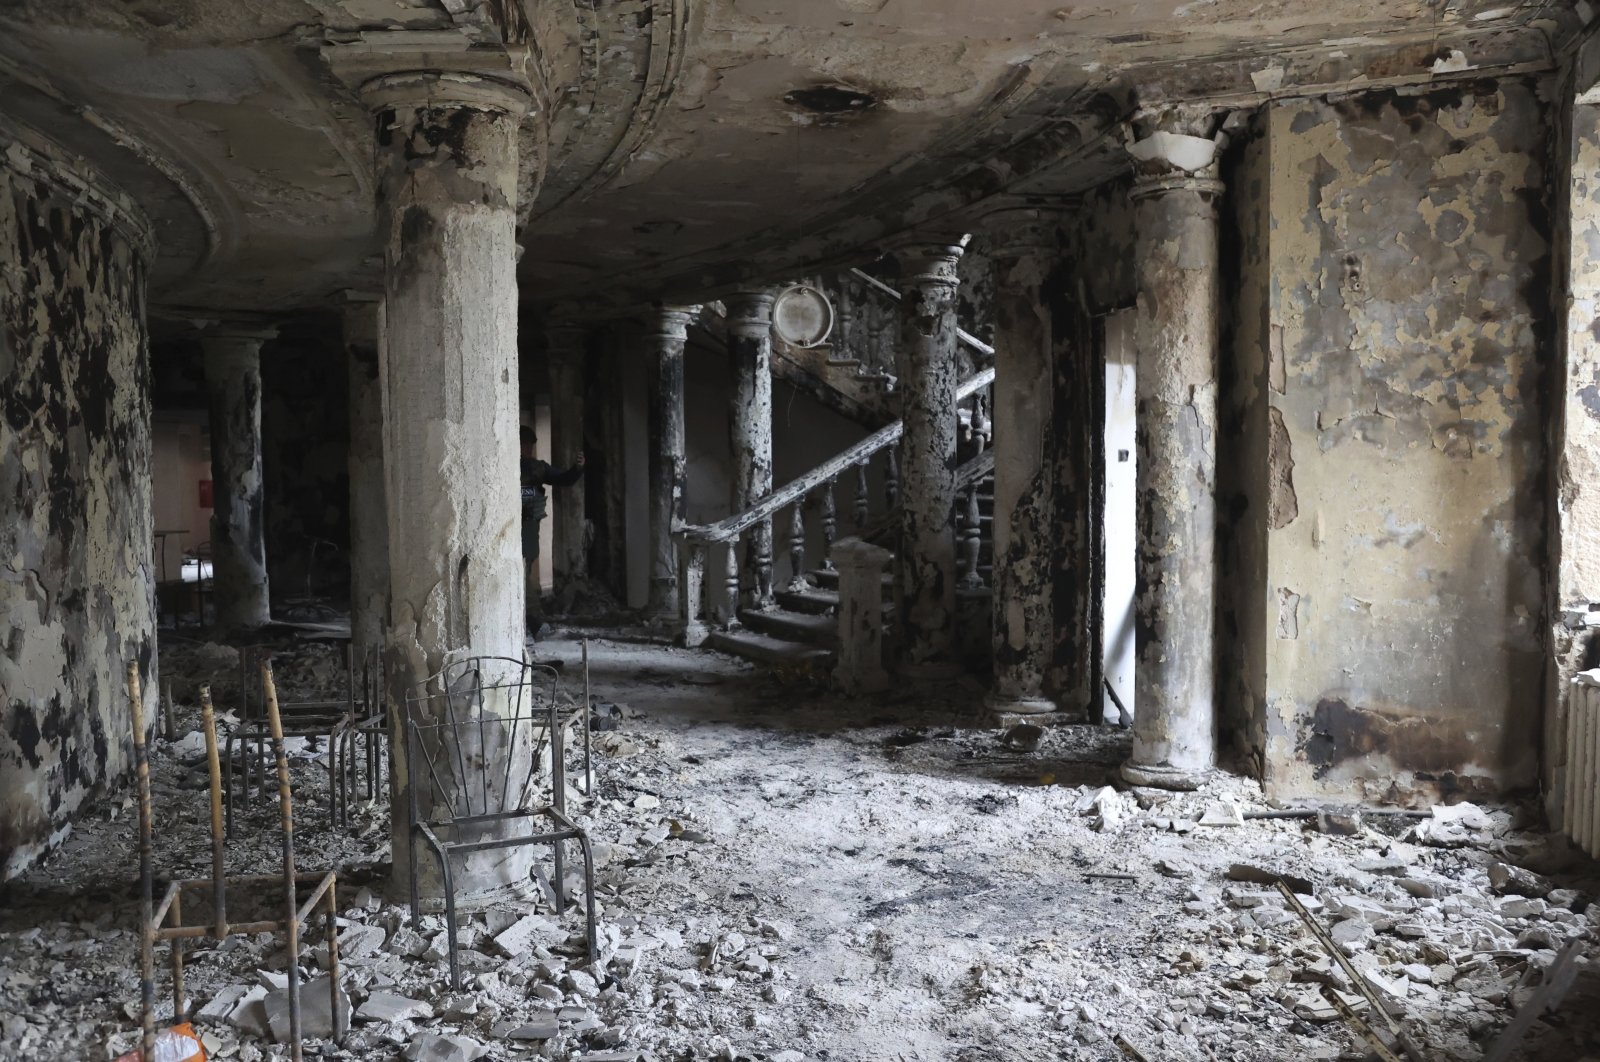 Debris covers the inside of the Mariupol theater damaged by Russian attacks in Mariupol, eastern Ukraine, April 4, 2022. (AP Photo)